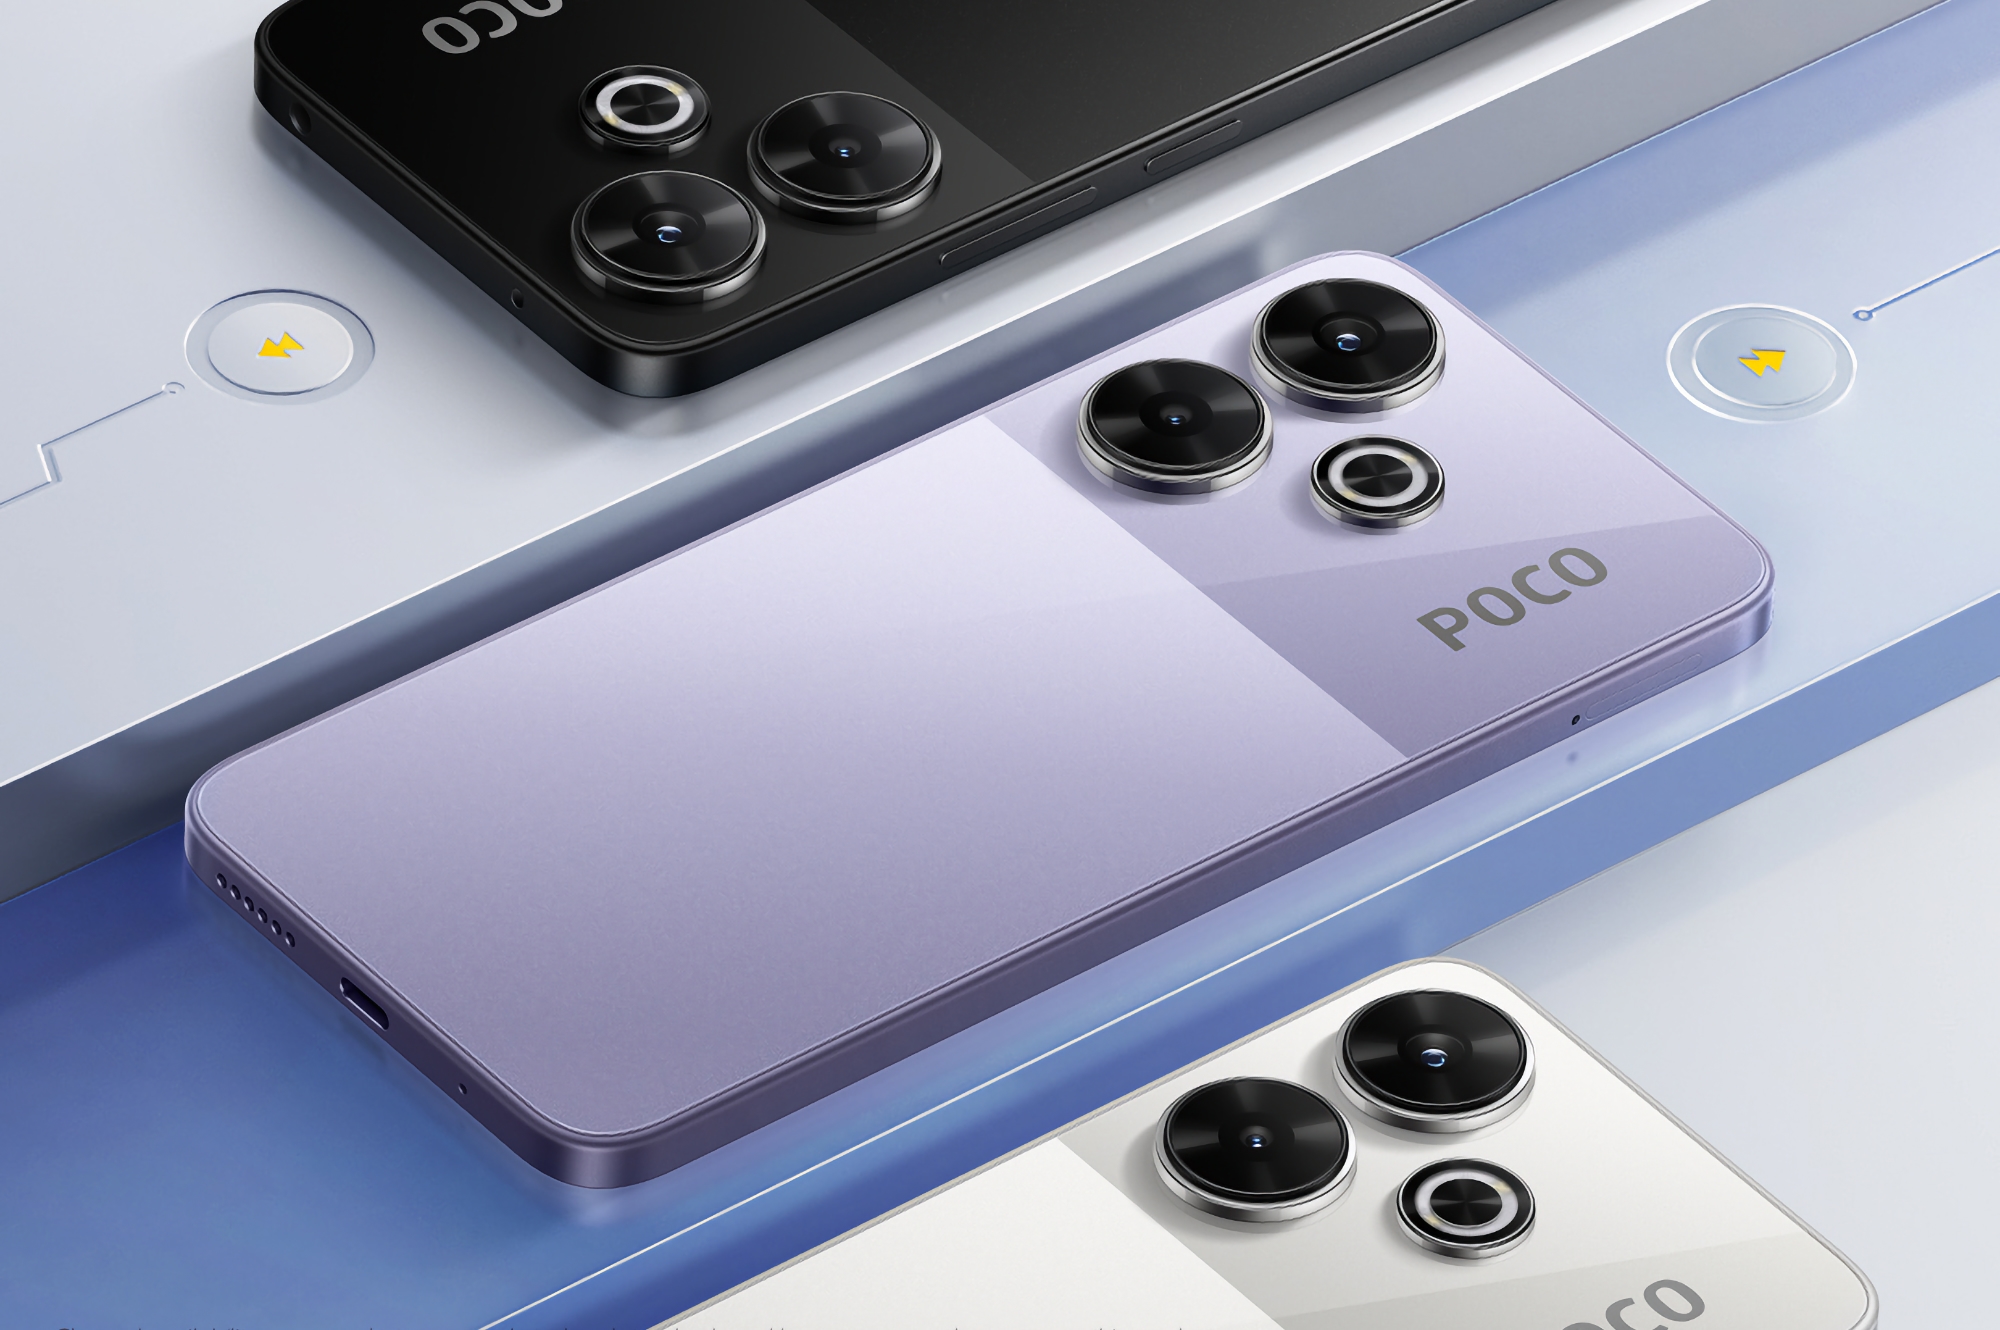 It's official: Xiaomi will launch the POCO M6 smartphone with a 108 MP camera, 33W charging and a price starting at $129 in the global market on 11 June